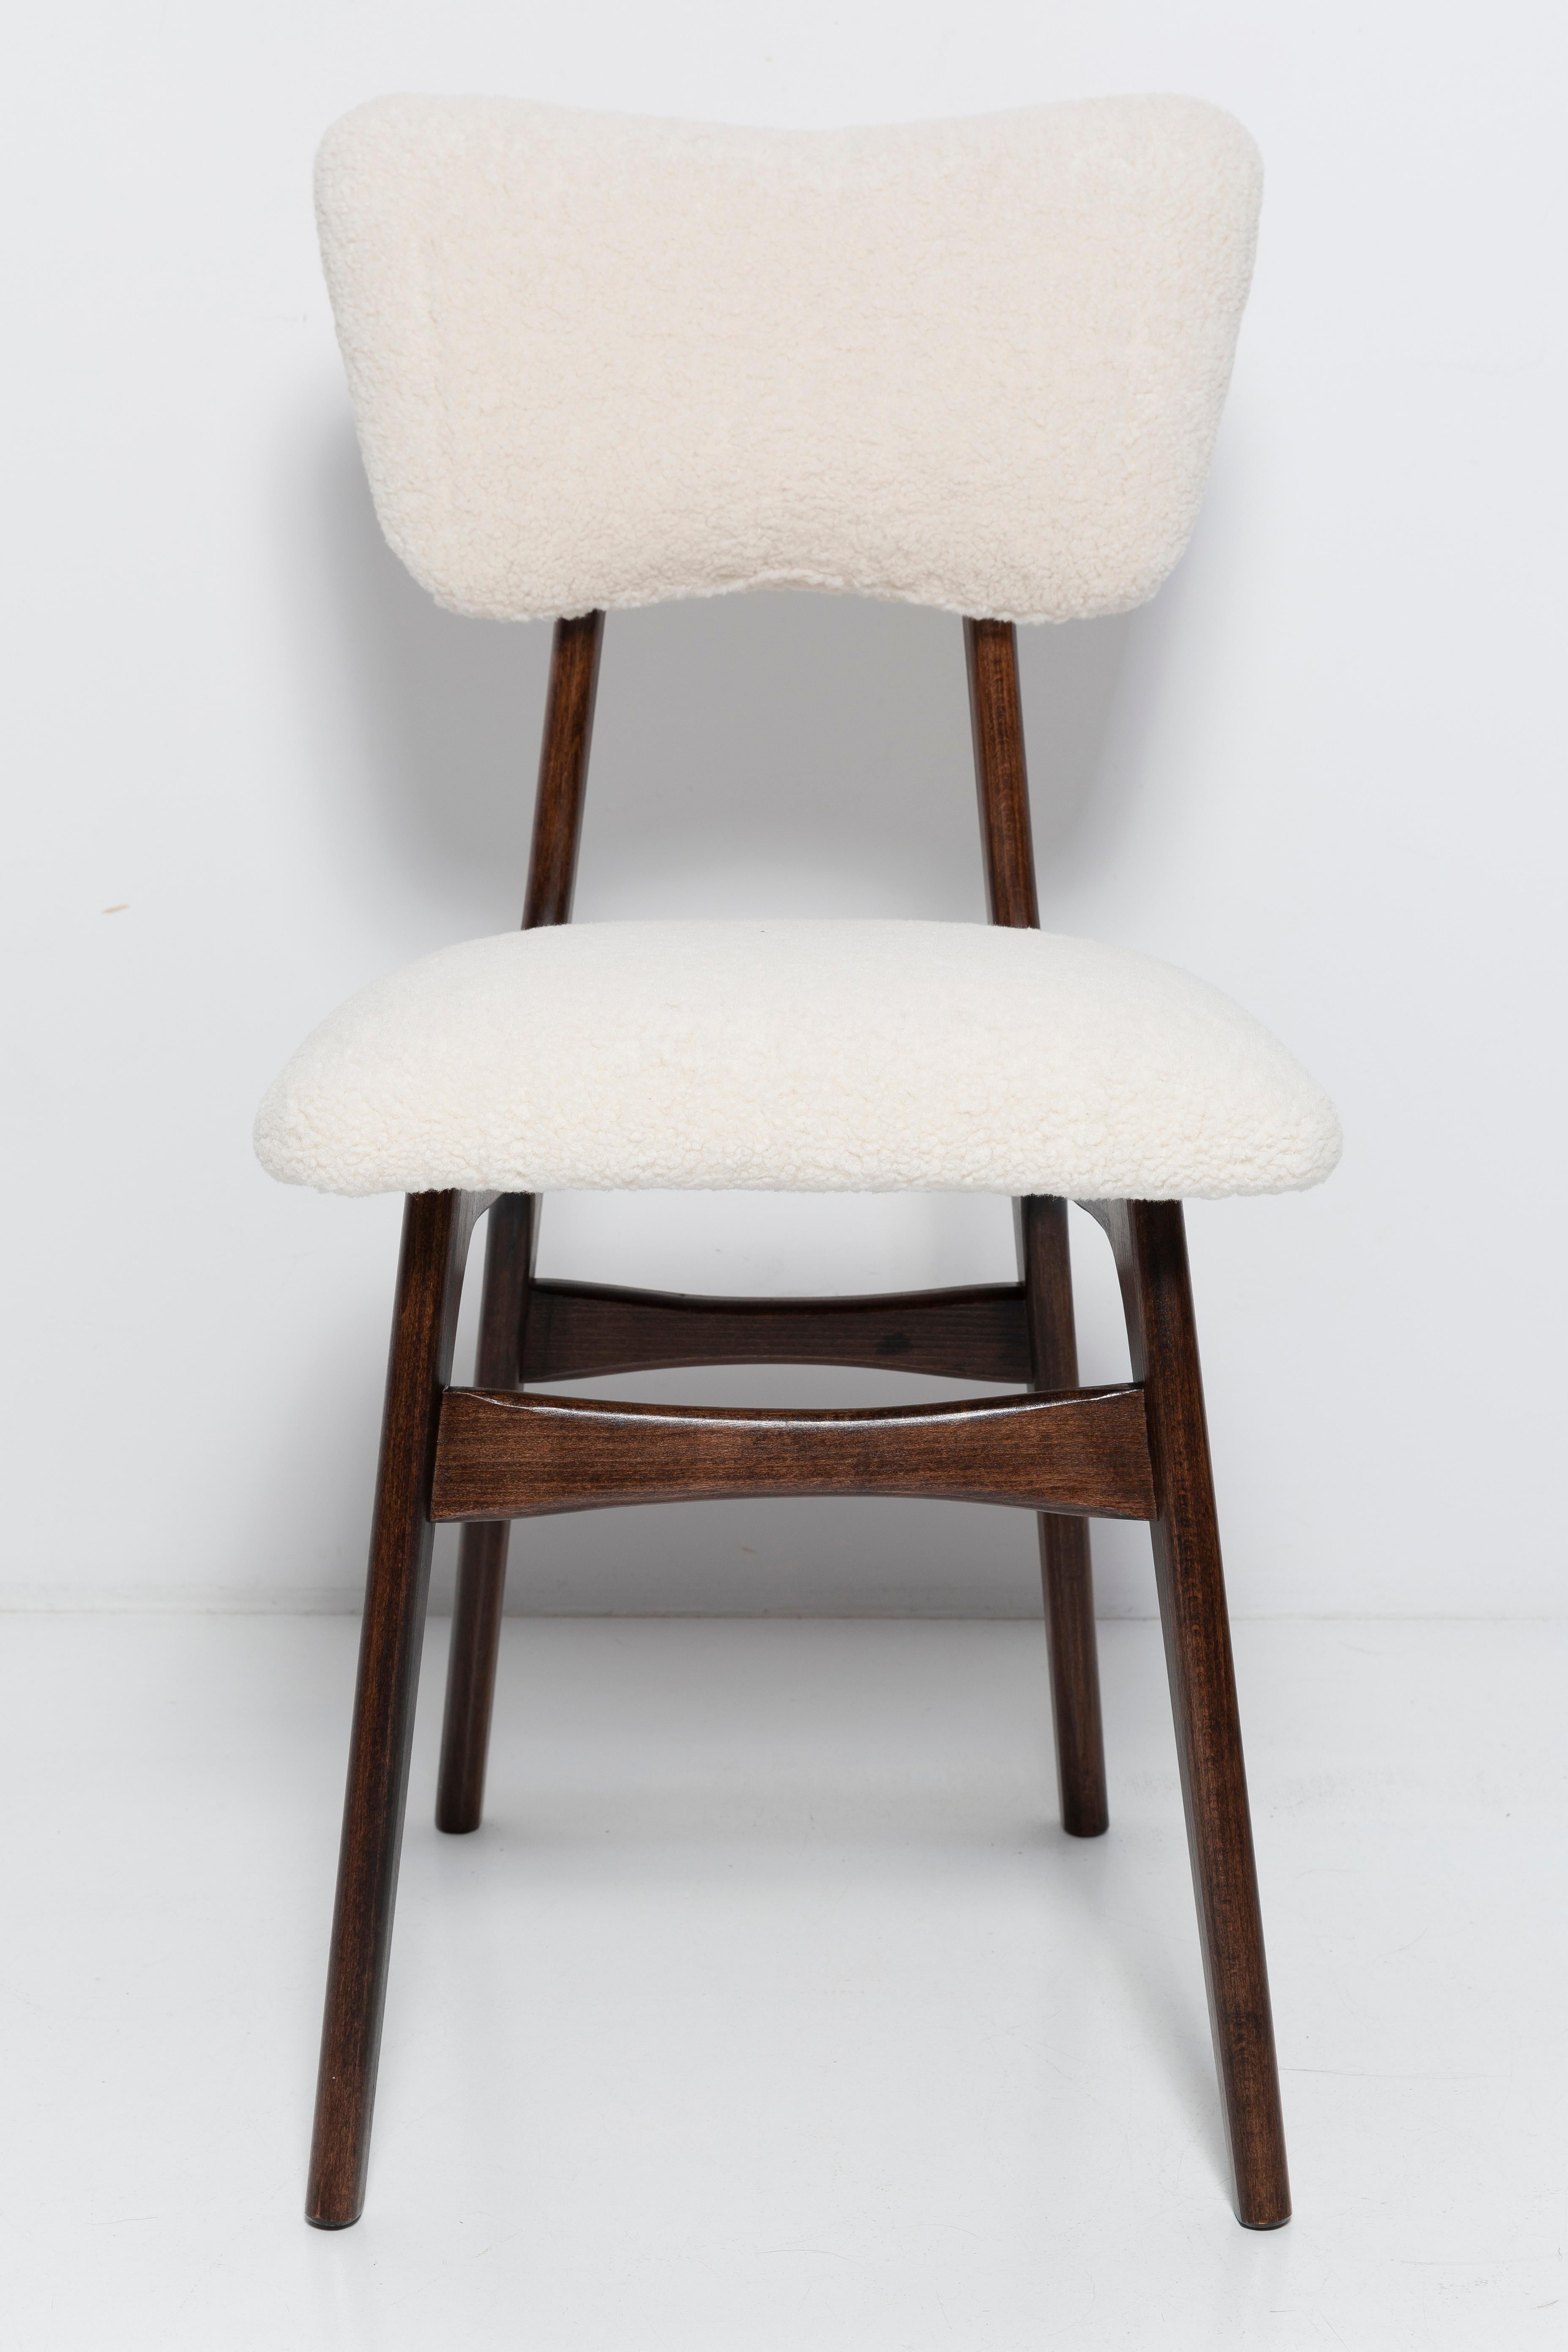 20th Century Light Crème Boucle Walnut Wood Butterfly Chair, Europe, 1960. For Sale 3